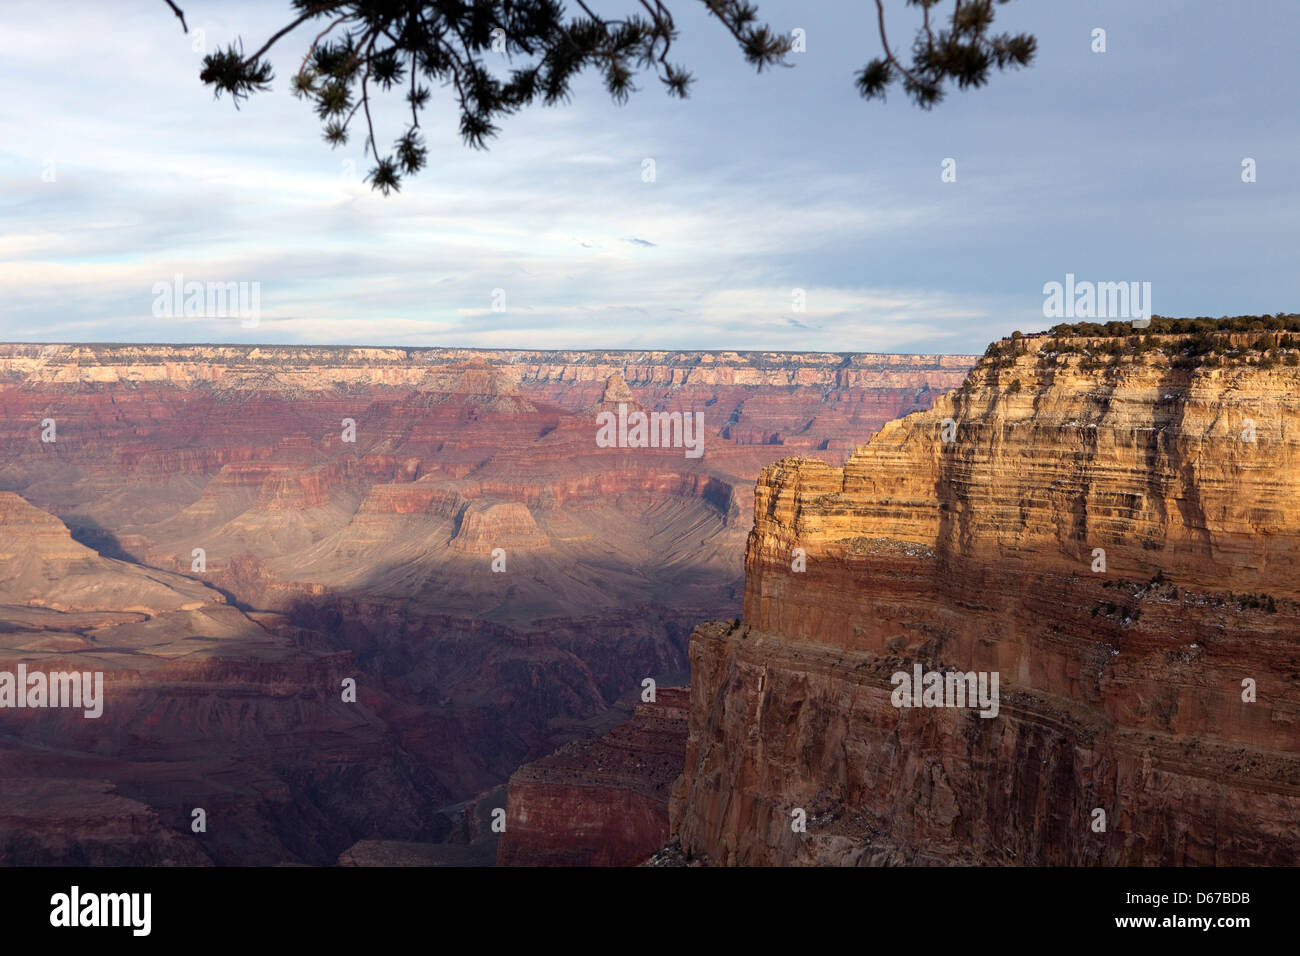 A view of the Grand Canyon in Arizona, USA Stock Photo